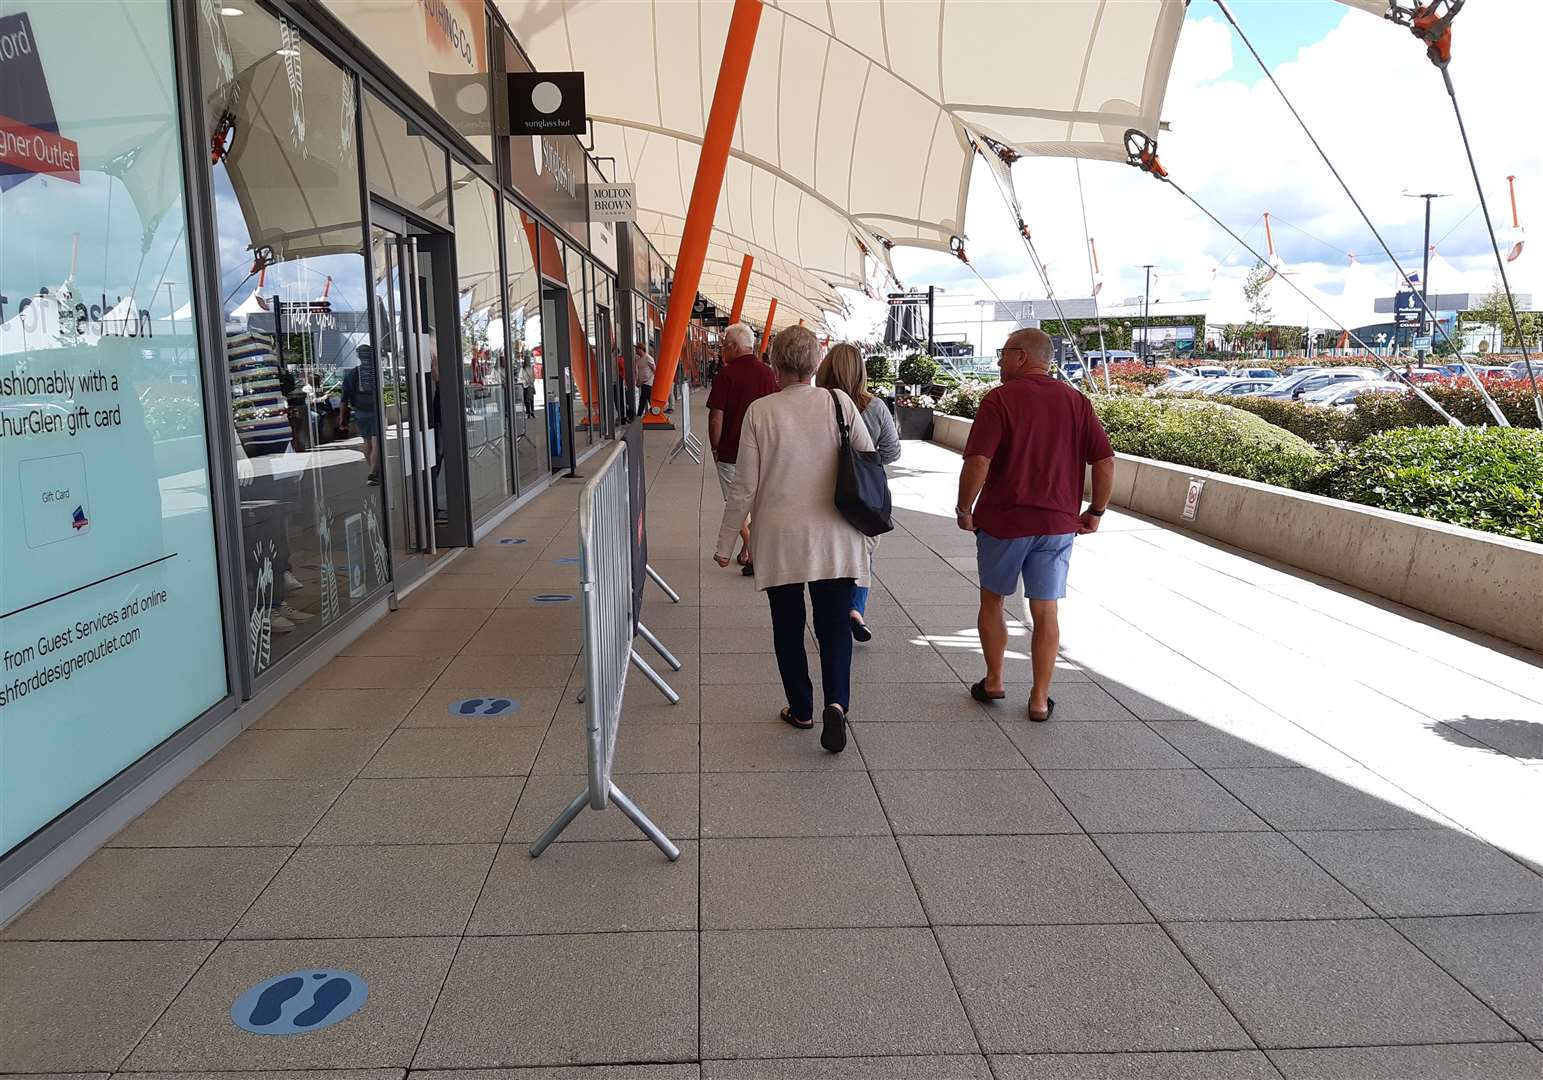 Shoppers at the Designer Outlet this morning